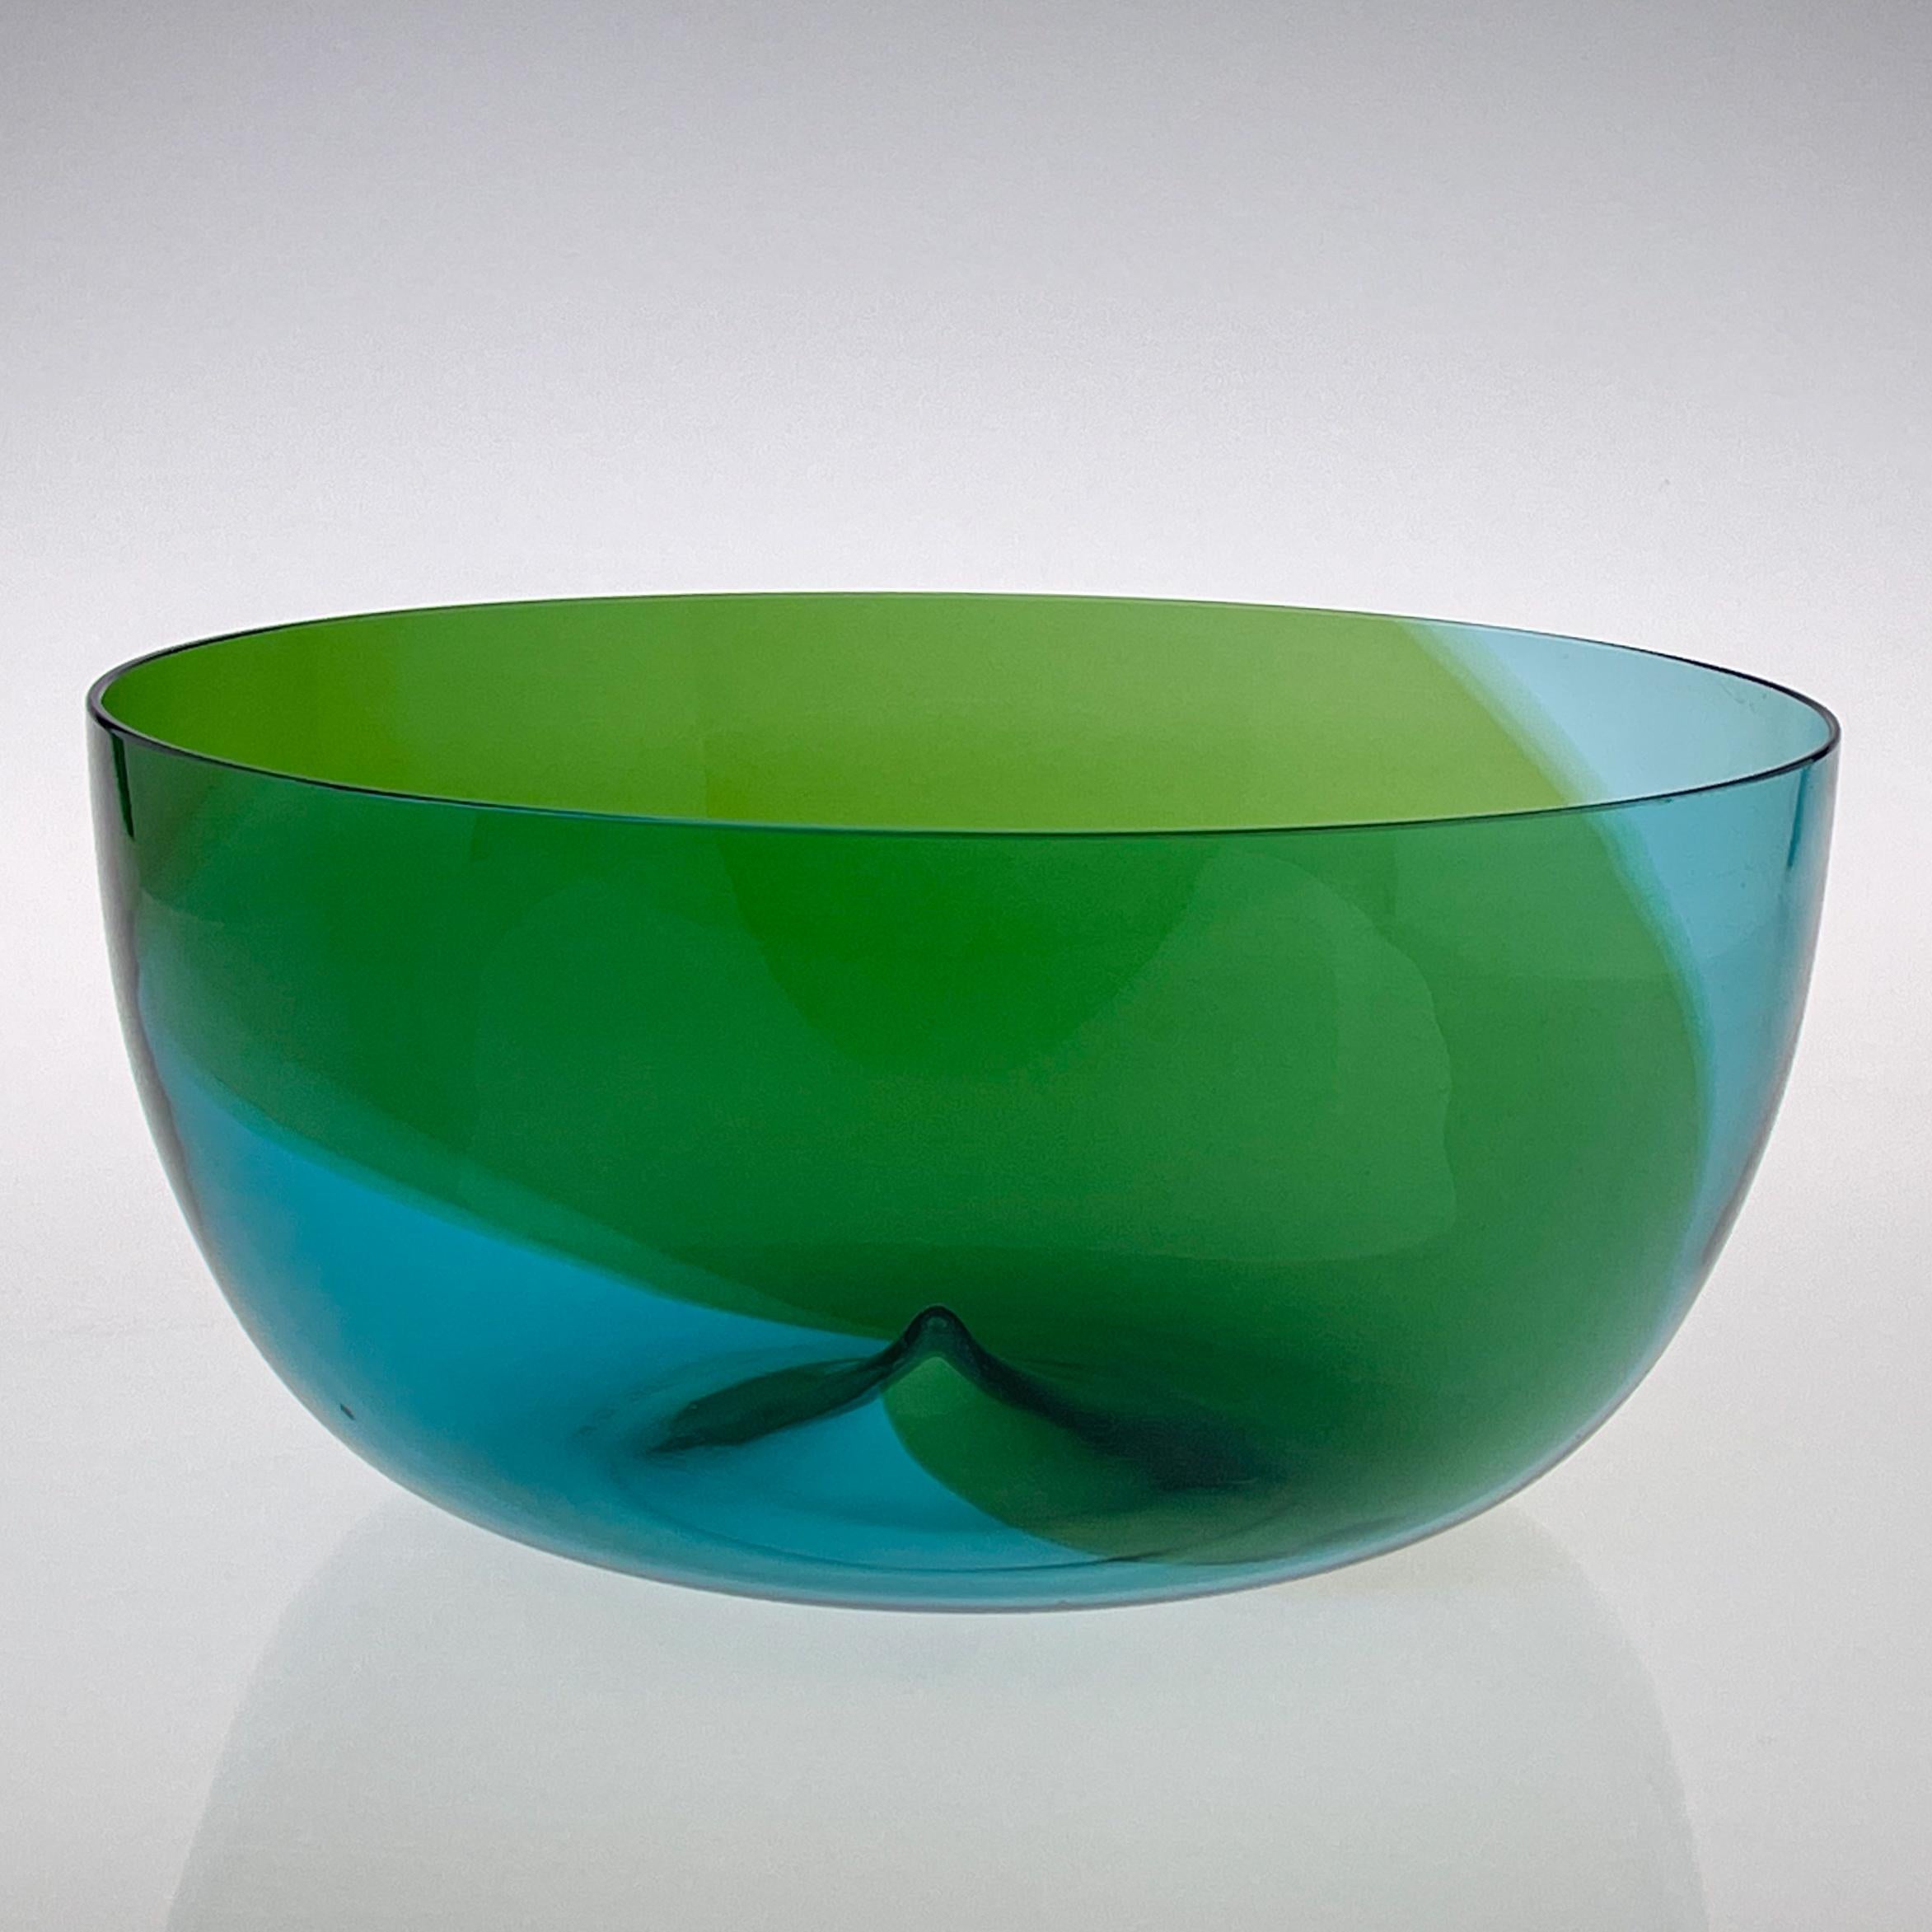 A rare capital “Coreano” Artglass-object, model 504.4 in freeblown applegreen and turquoise glass.

Designed in 1966 and handmade by the craftsman of the Venini glassworks on the Island of Murano in Venice in 1985.

The 